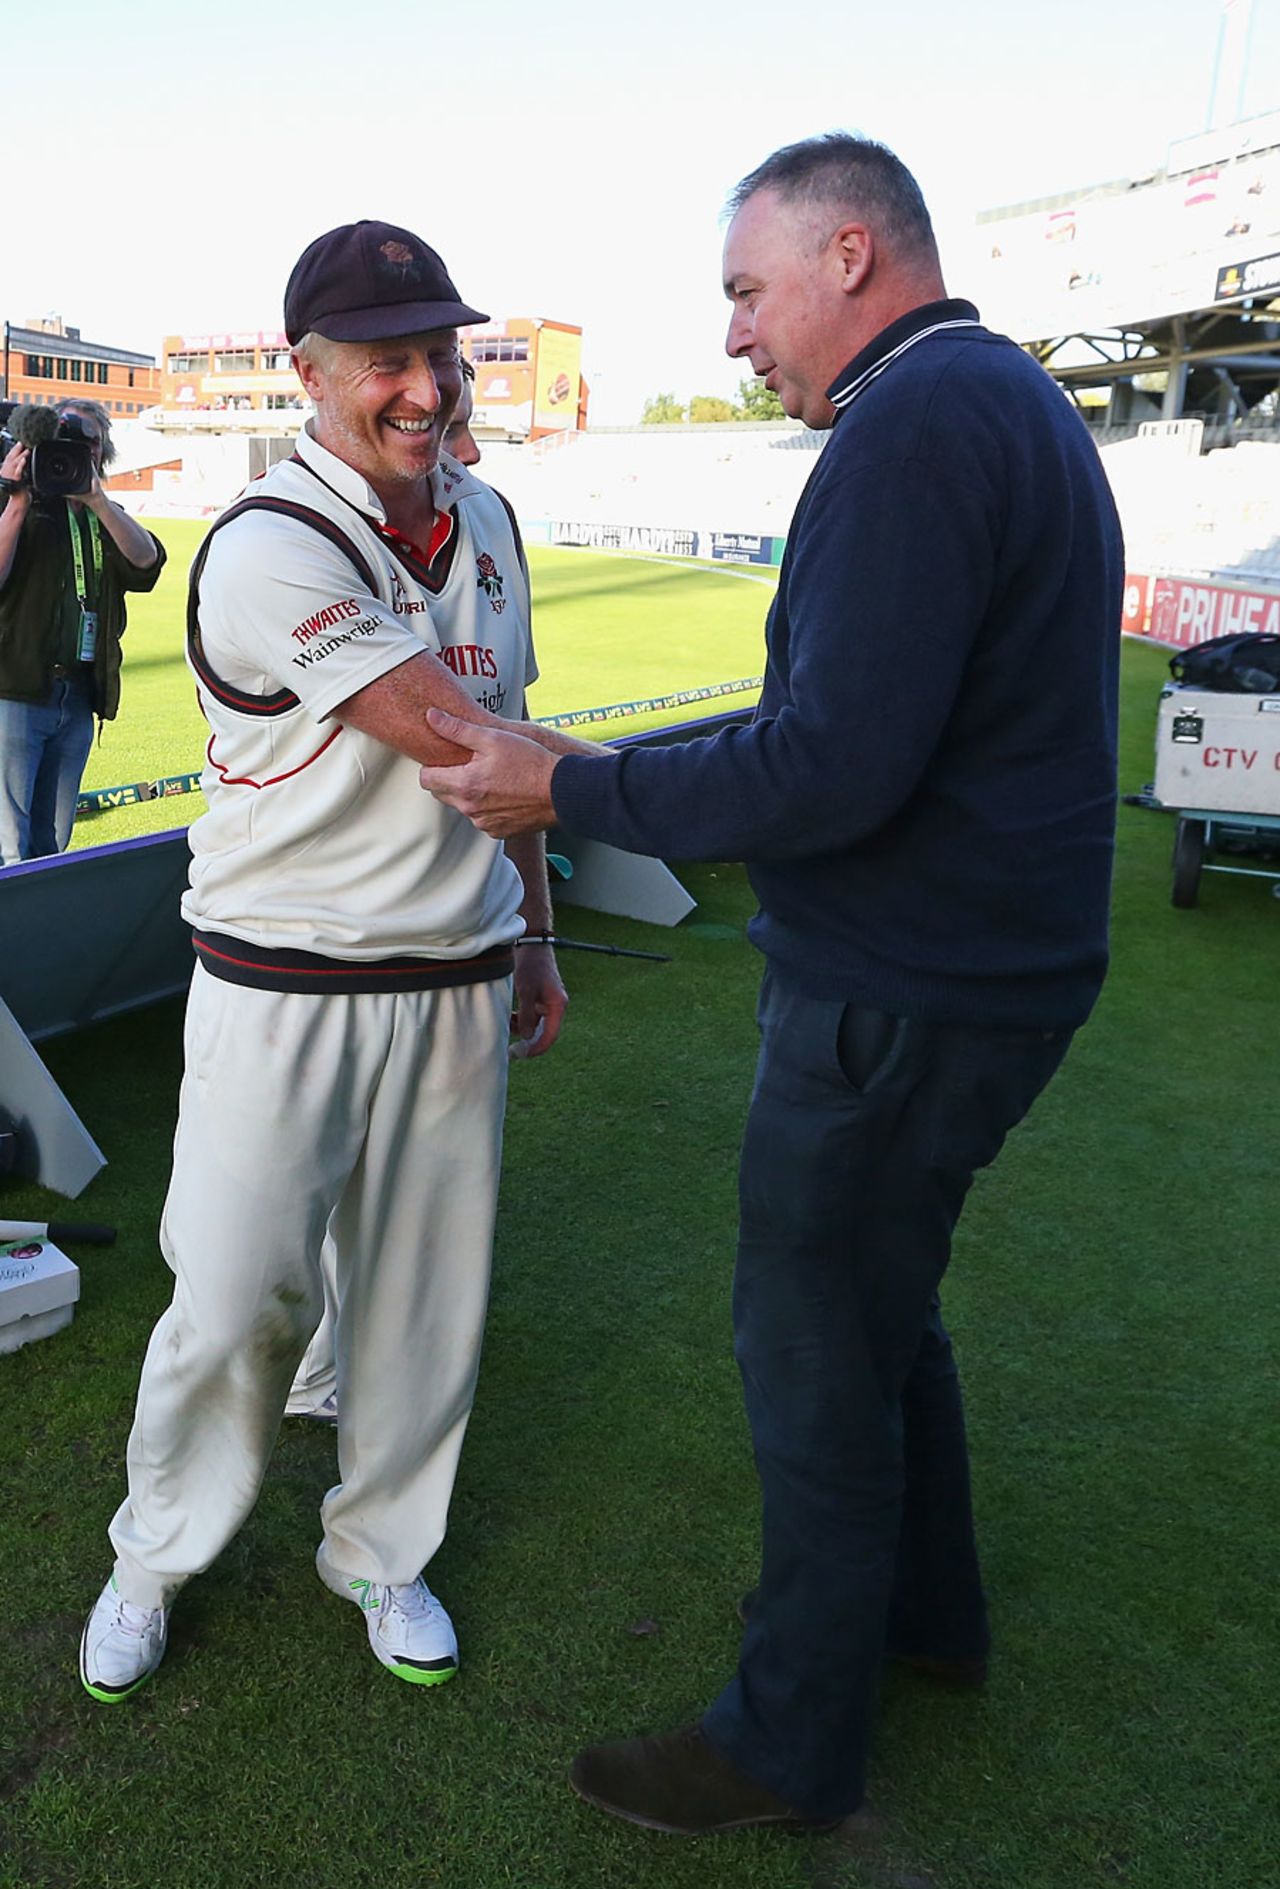 Angus Fraser shakes hands with Glen Chapple, Lancashire v Middlesex, County Championship, Division One, Old Trafford, September 26, 2014